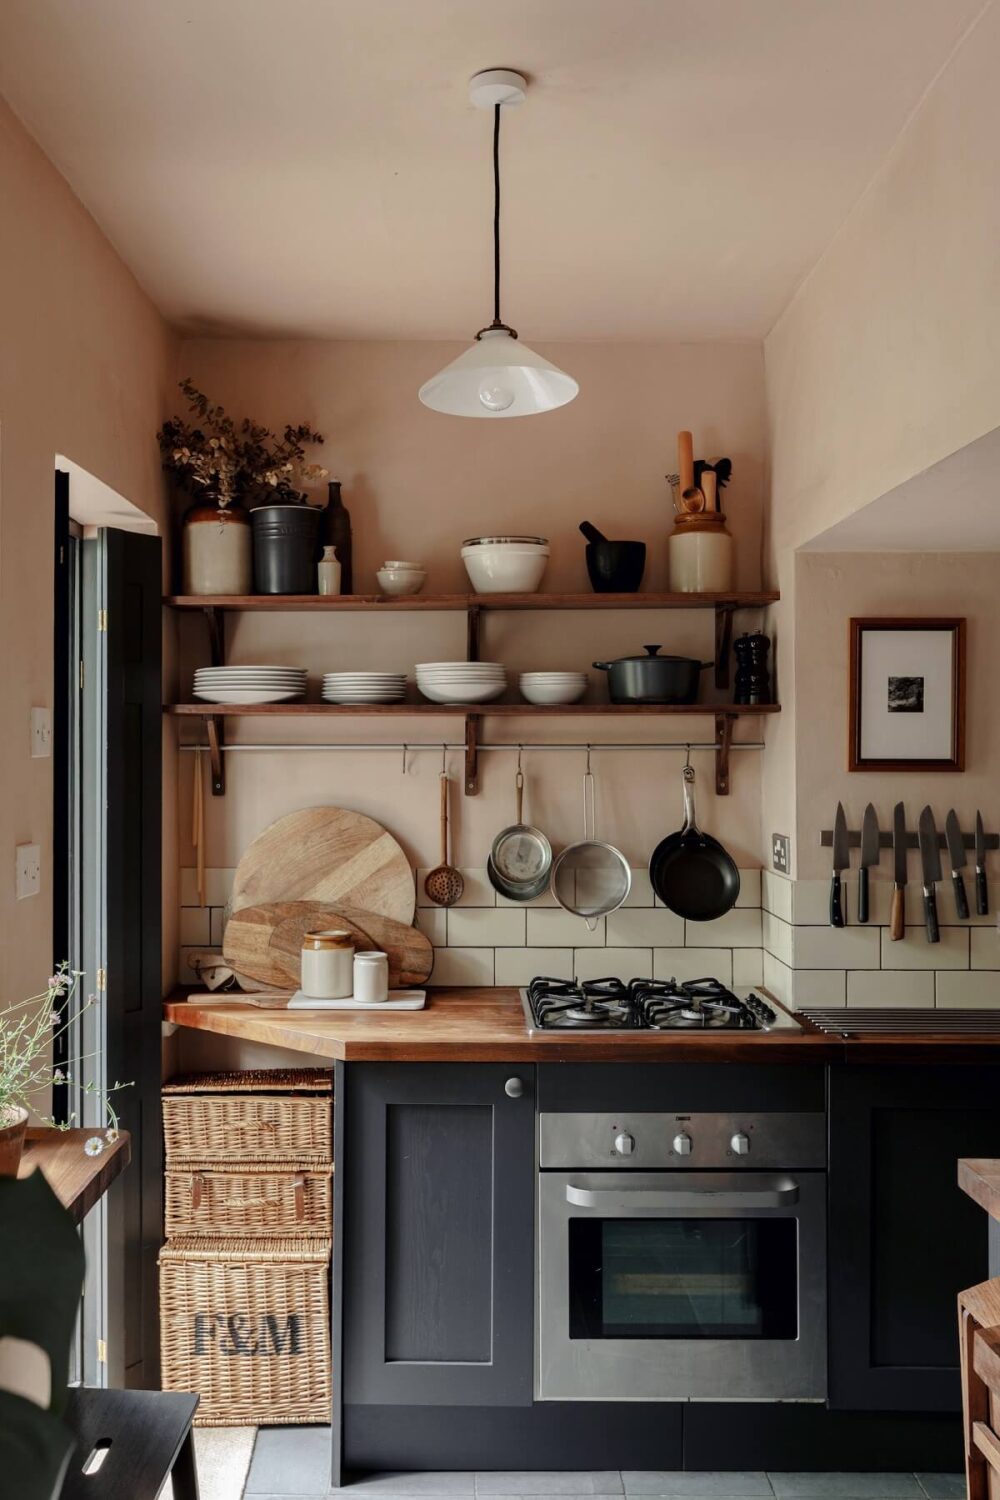 kitchen-pink-walls-dark-gray-cabinets-open-shelves-period-home-london-nordroom